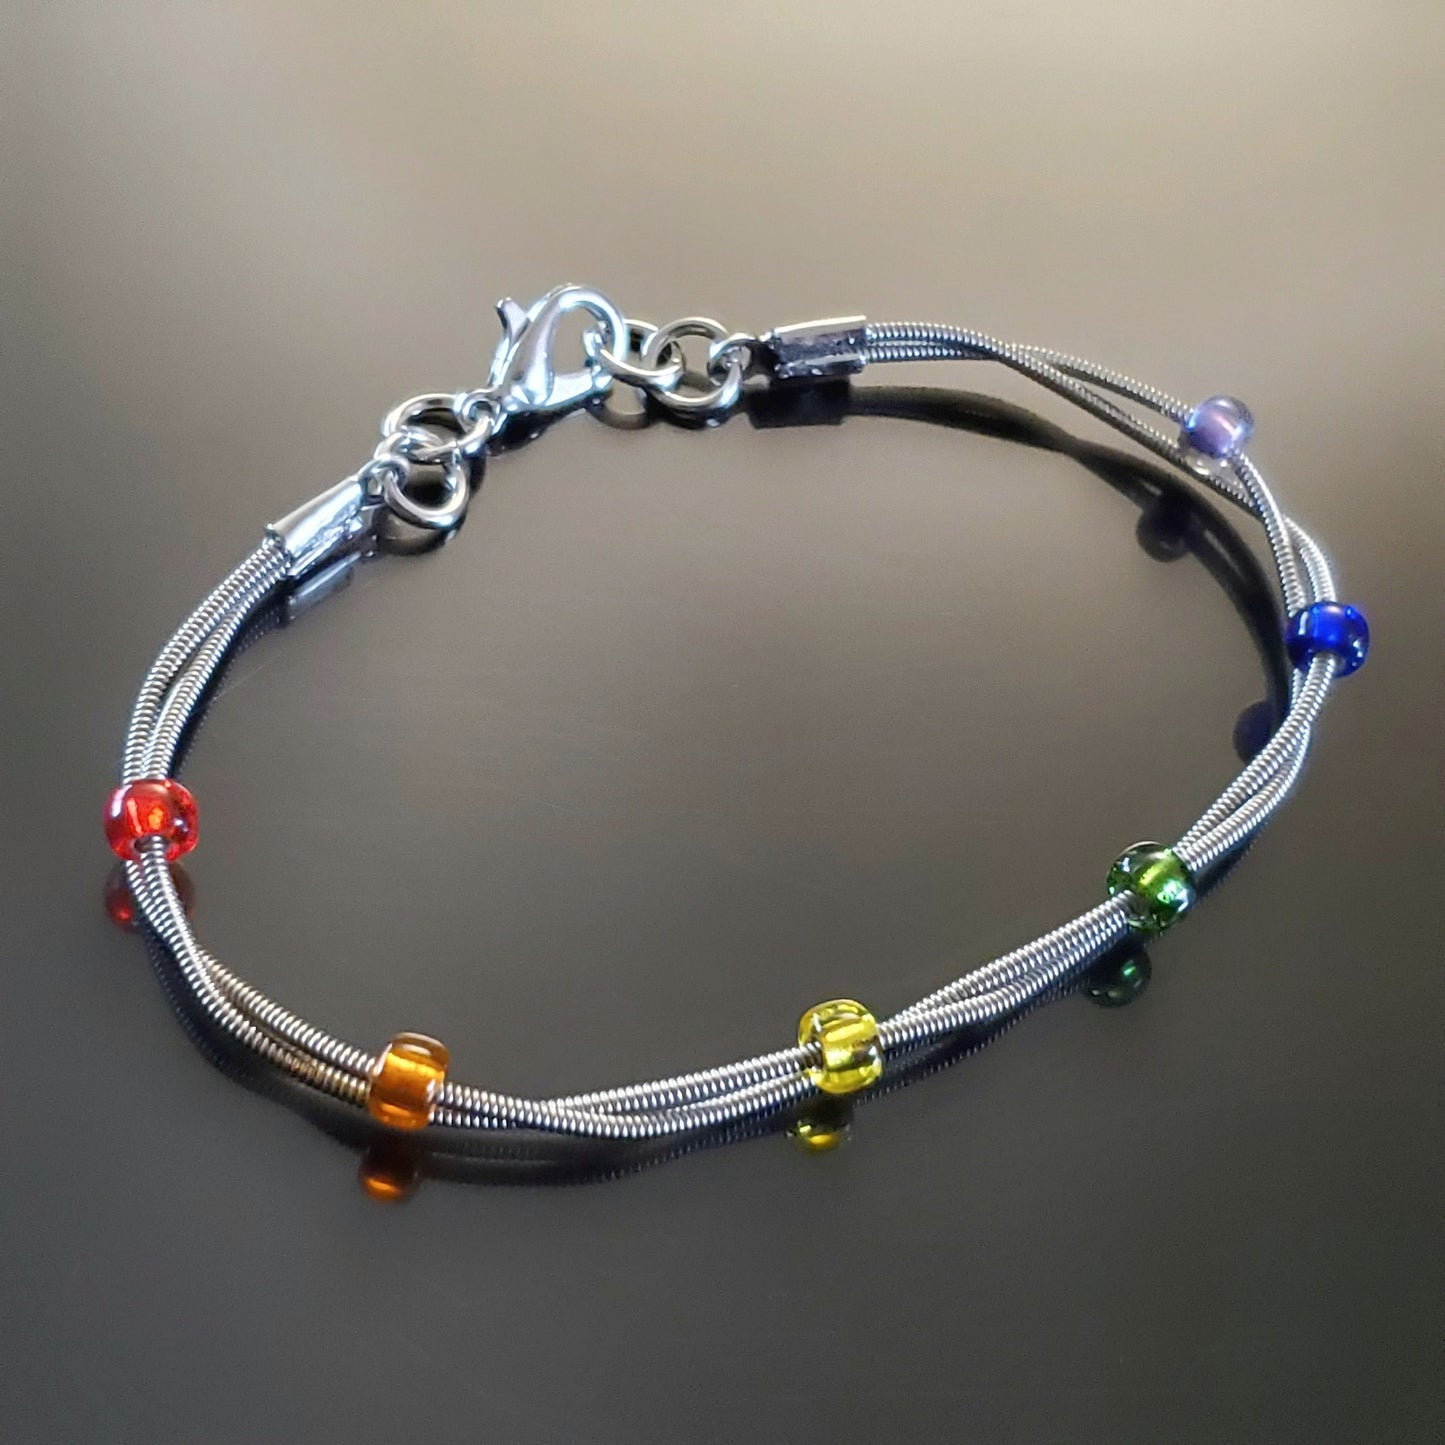 clasp style bracelet made from two upcycled guitar strings - 6 glass beads represent the colours of the LGBTQ flag (red, orange, yellow, green, blue and purple) 